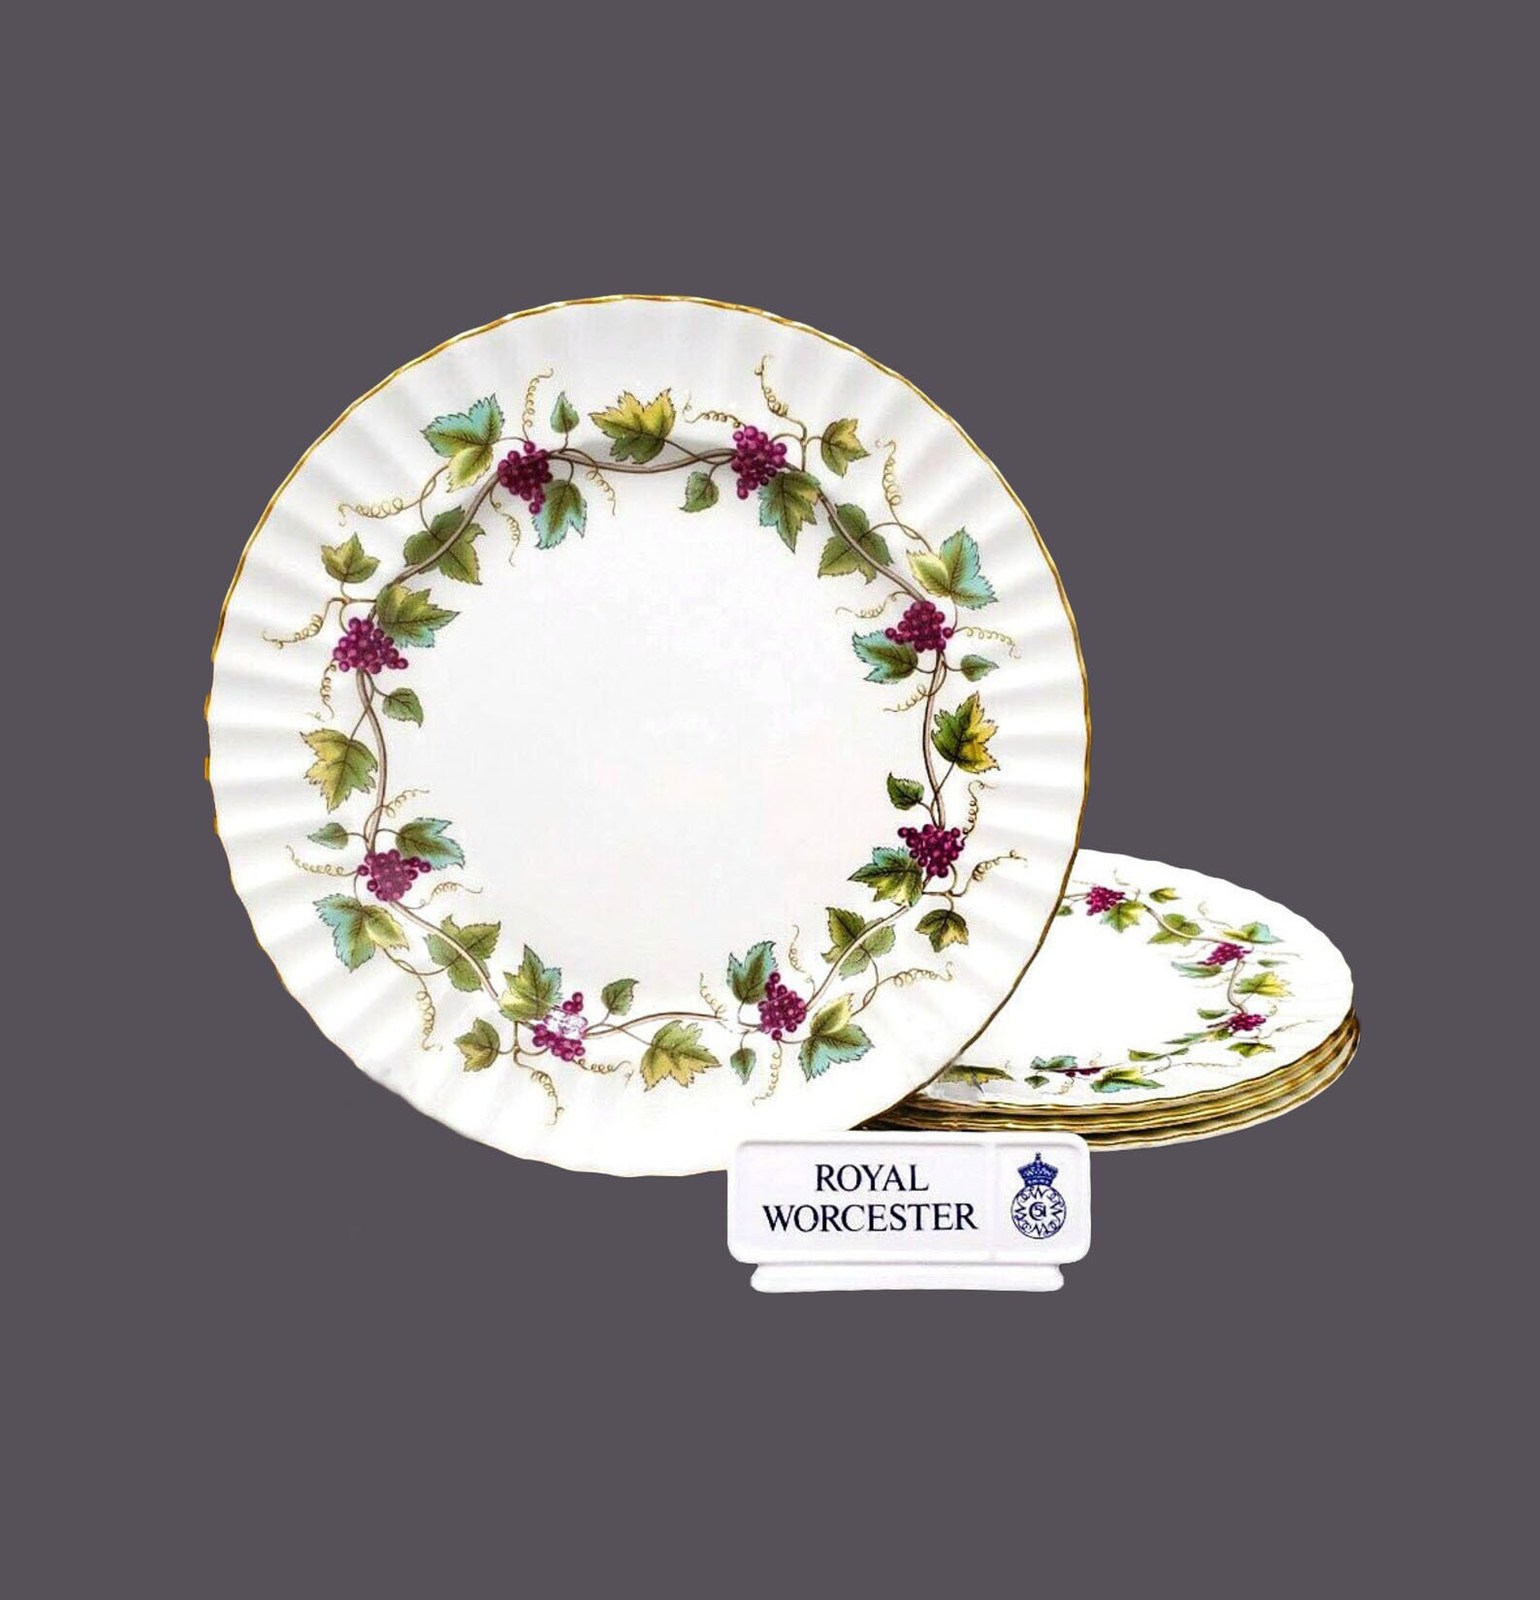 Royal Worcester Bacchanal White Z2822 dinner plate. Sold individually. - $32.25